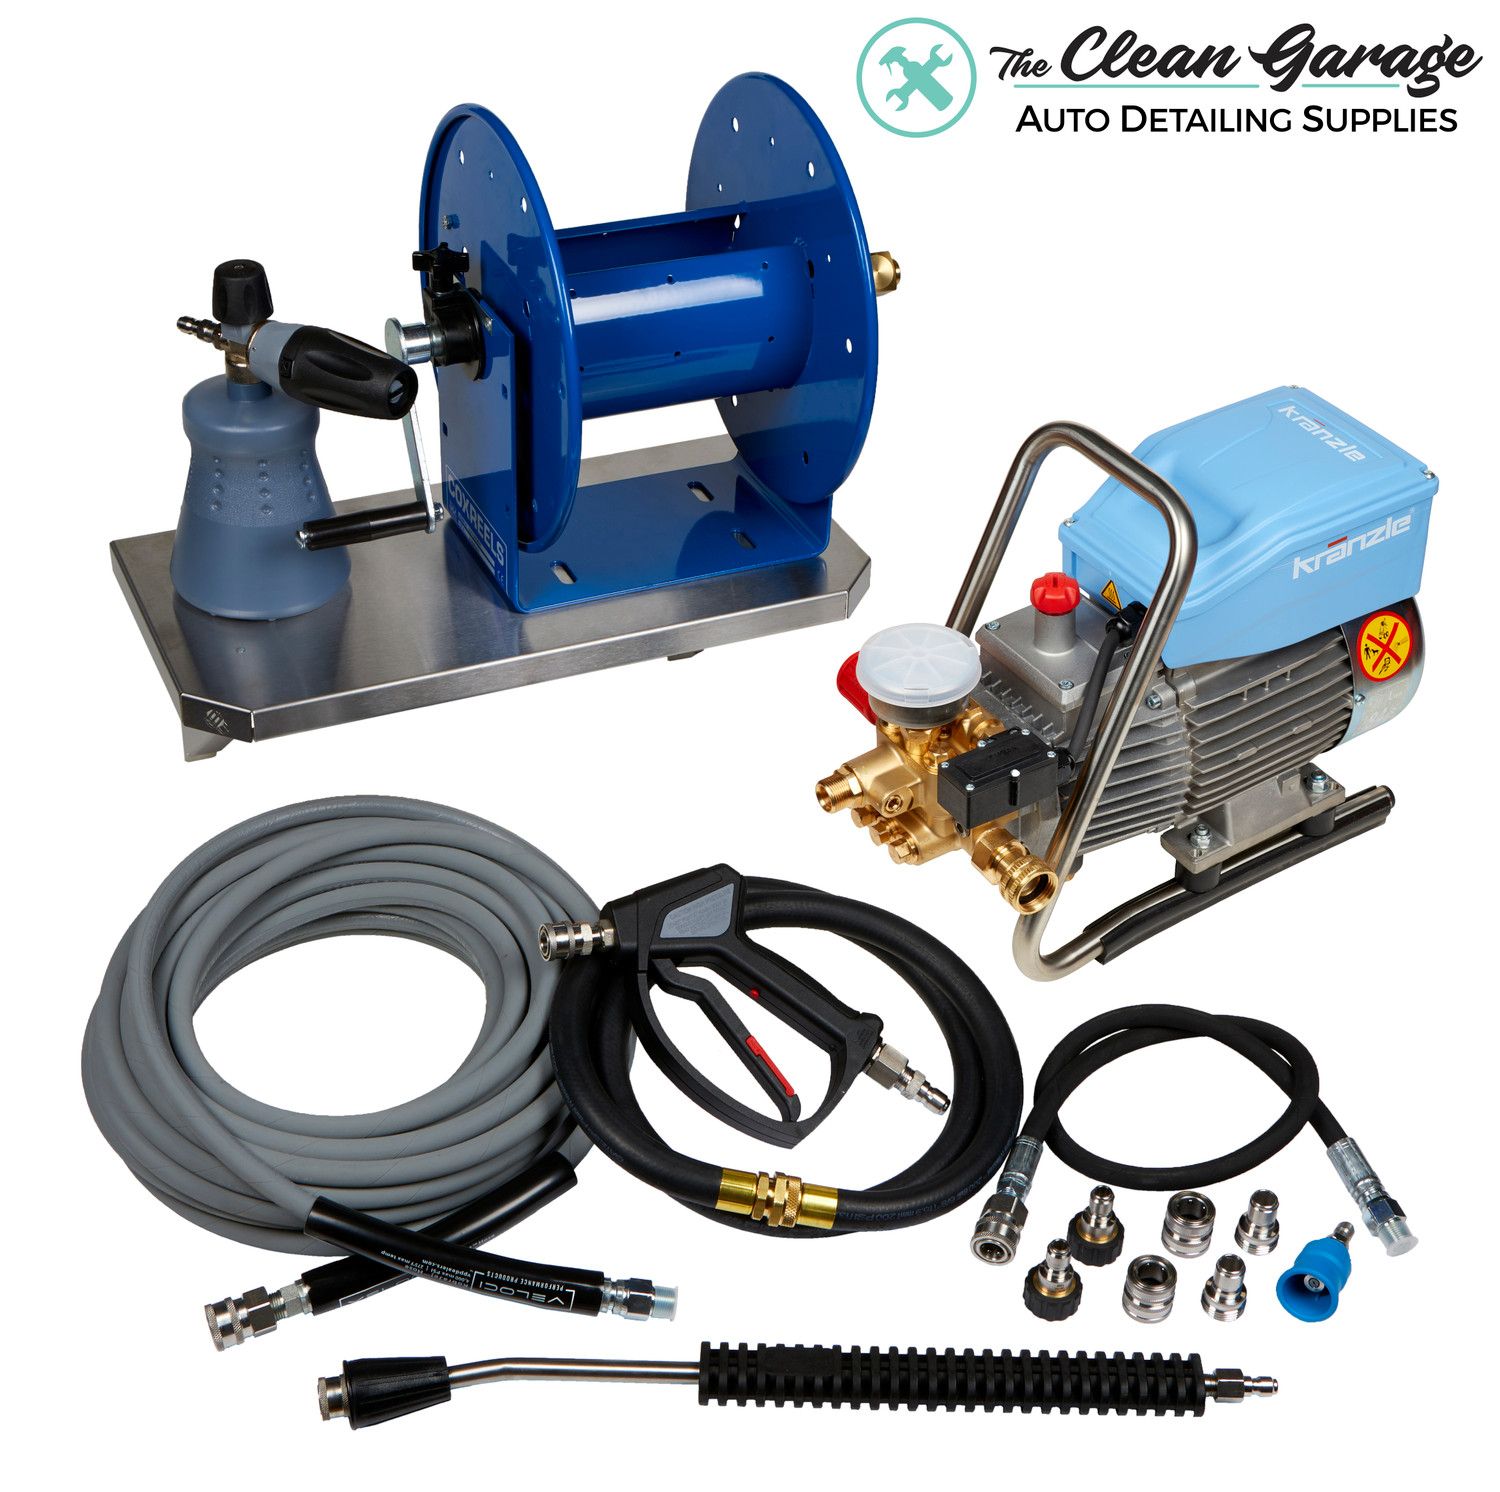 Wall Mount Pressure Washer Package - Complete Unit by Kranzle